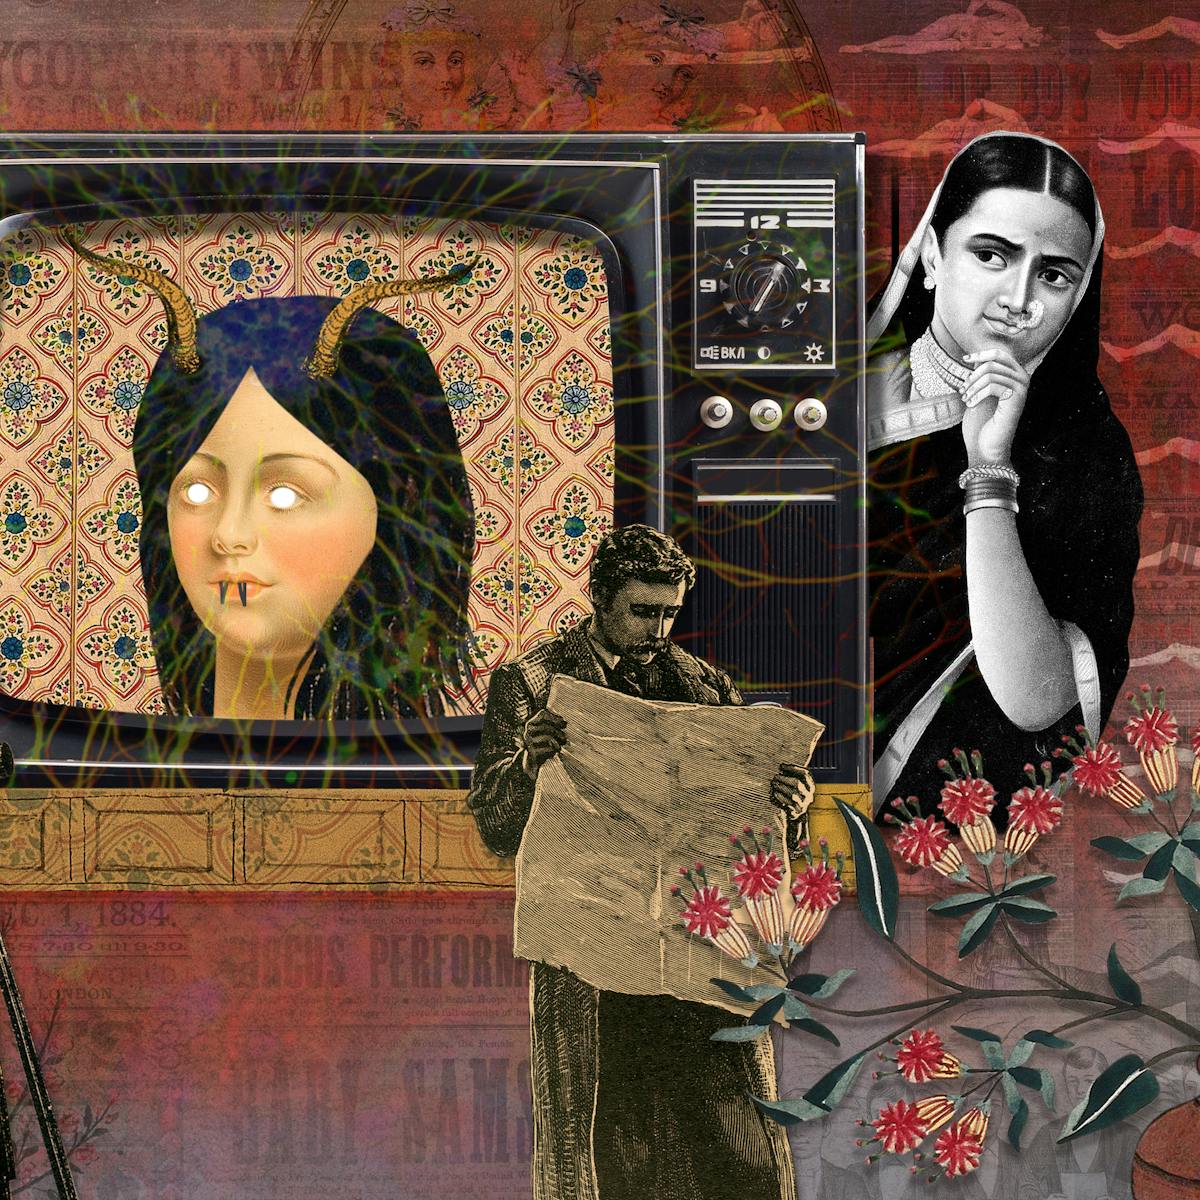 Illustration using collage techniques. Image shows a scene made up of mainly red and purple hues. In the centre of the image is a tv screen with the head of a woman, her eyes replaced with white dots and horns growing out of her head. To the right of the tv a woman in black and white looks towards the screen her left hand holding her chin. Beneath the screen a man reads a newspaper. To the left of the screen an group of people look towards the screen, one has a camera, another clasps his head with his hand. Around the border of the image are palm leaves and a some flowers in a ceramic vase.